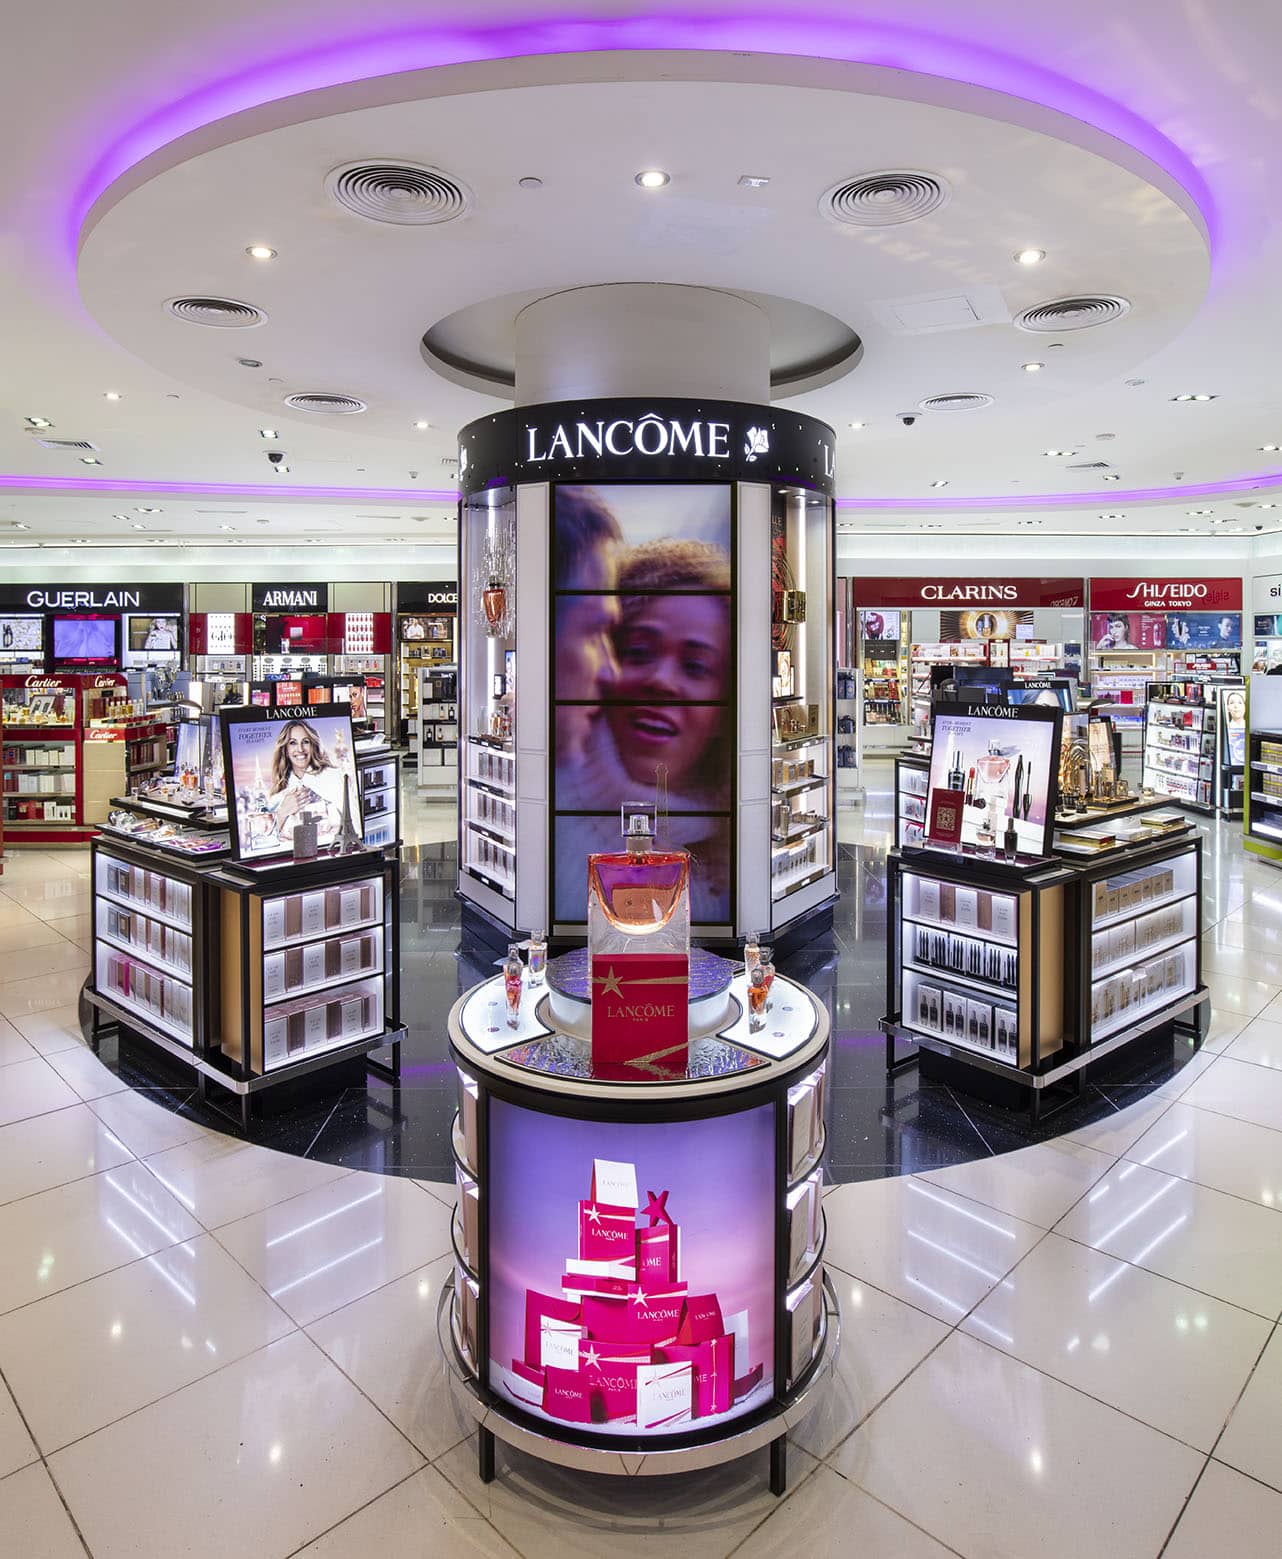 lancome & helena rubinstein shop dublin airport moprojects ladenbau with purple led on the ceiling